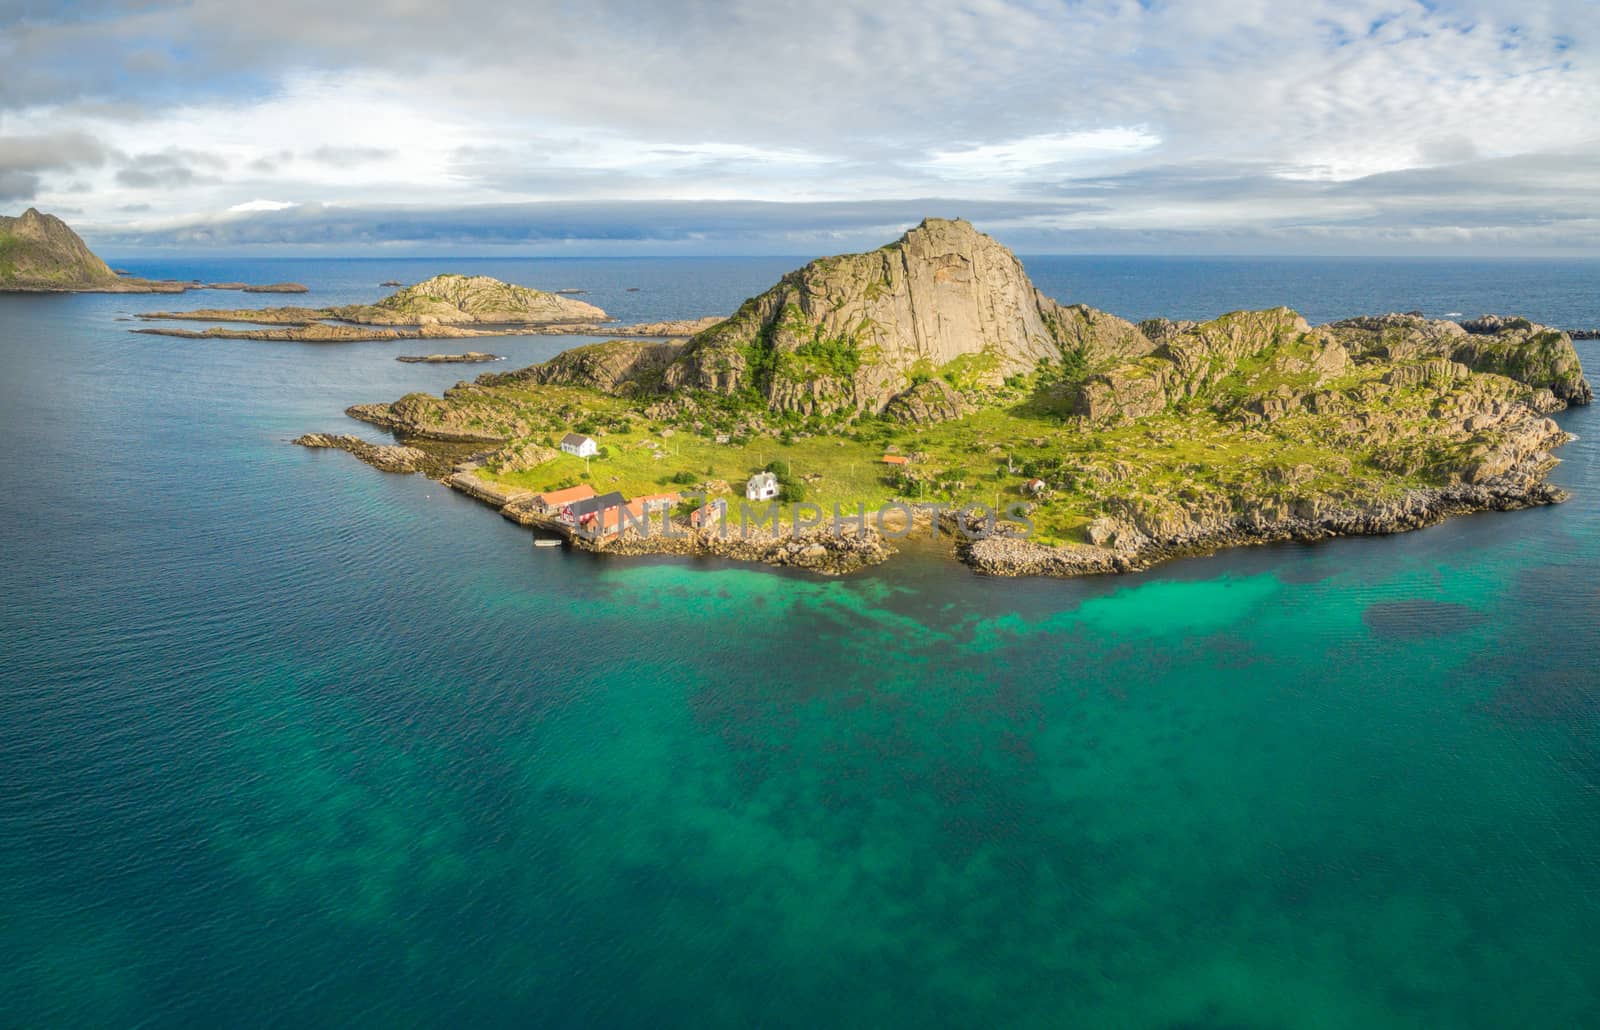 Picturesque islets on the coast of Lofoten islands in Norway